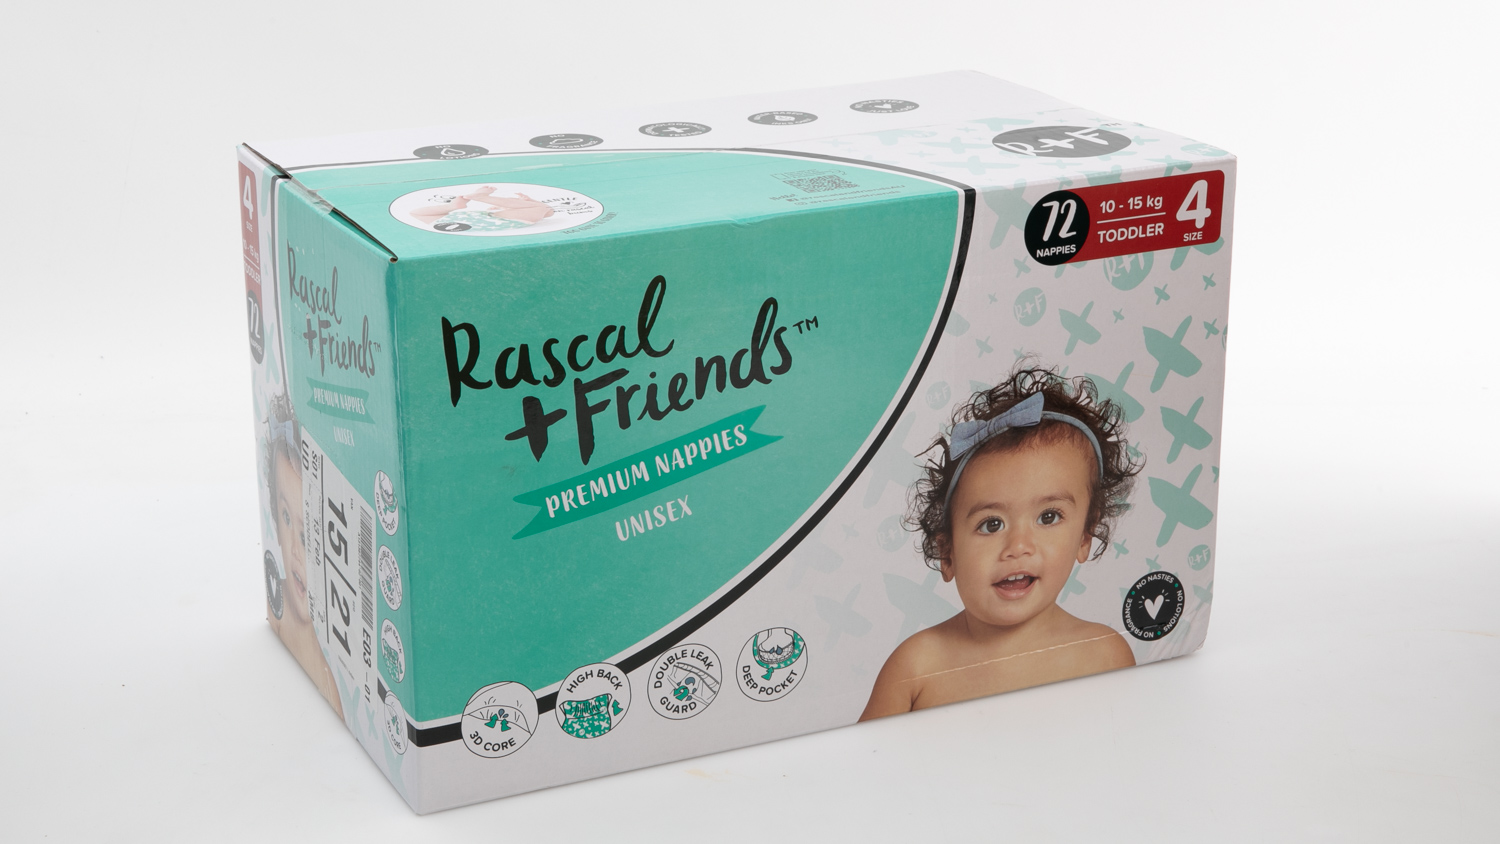 Rascal + Friends Premium Nappies Unisex Toddler Size 4 Review